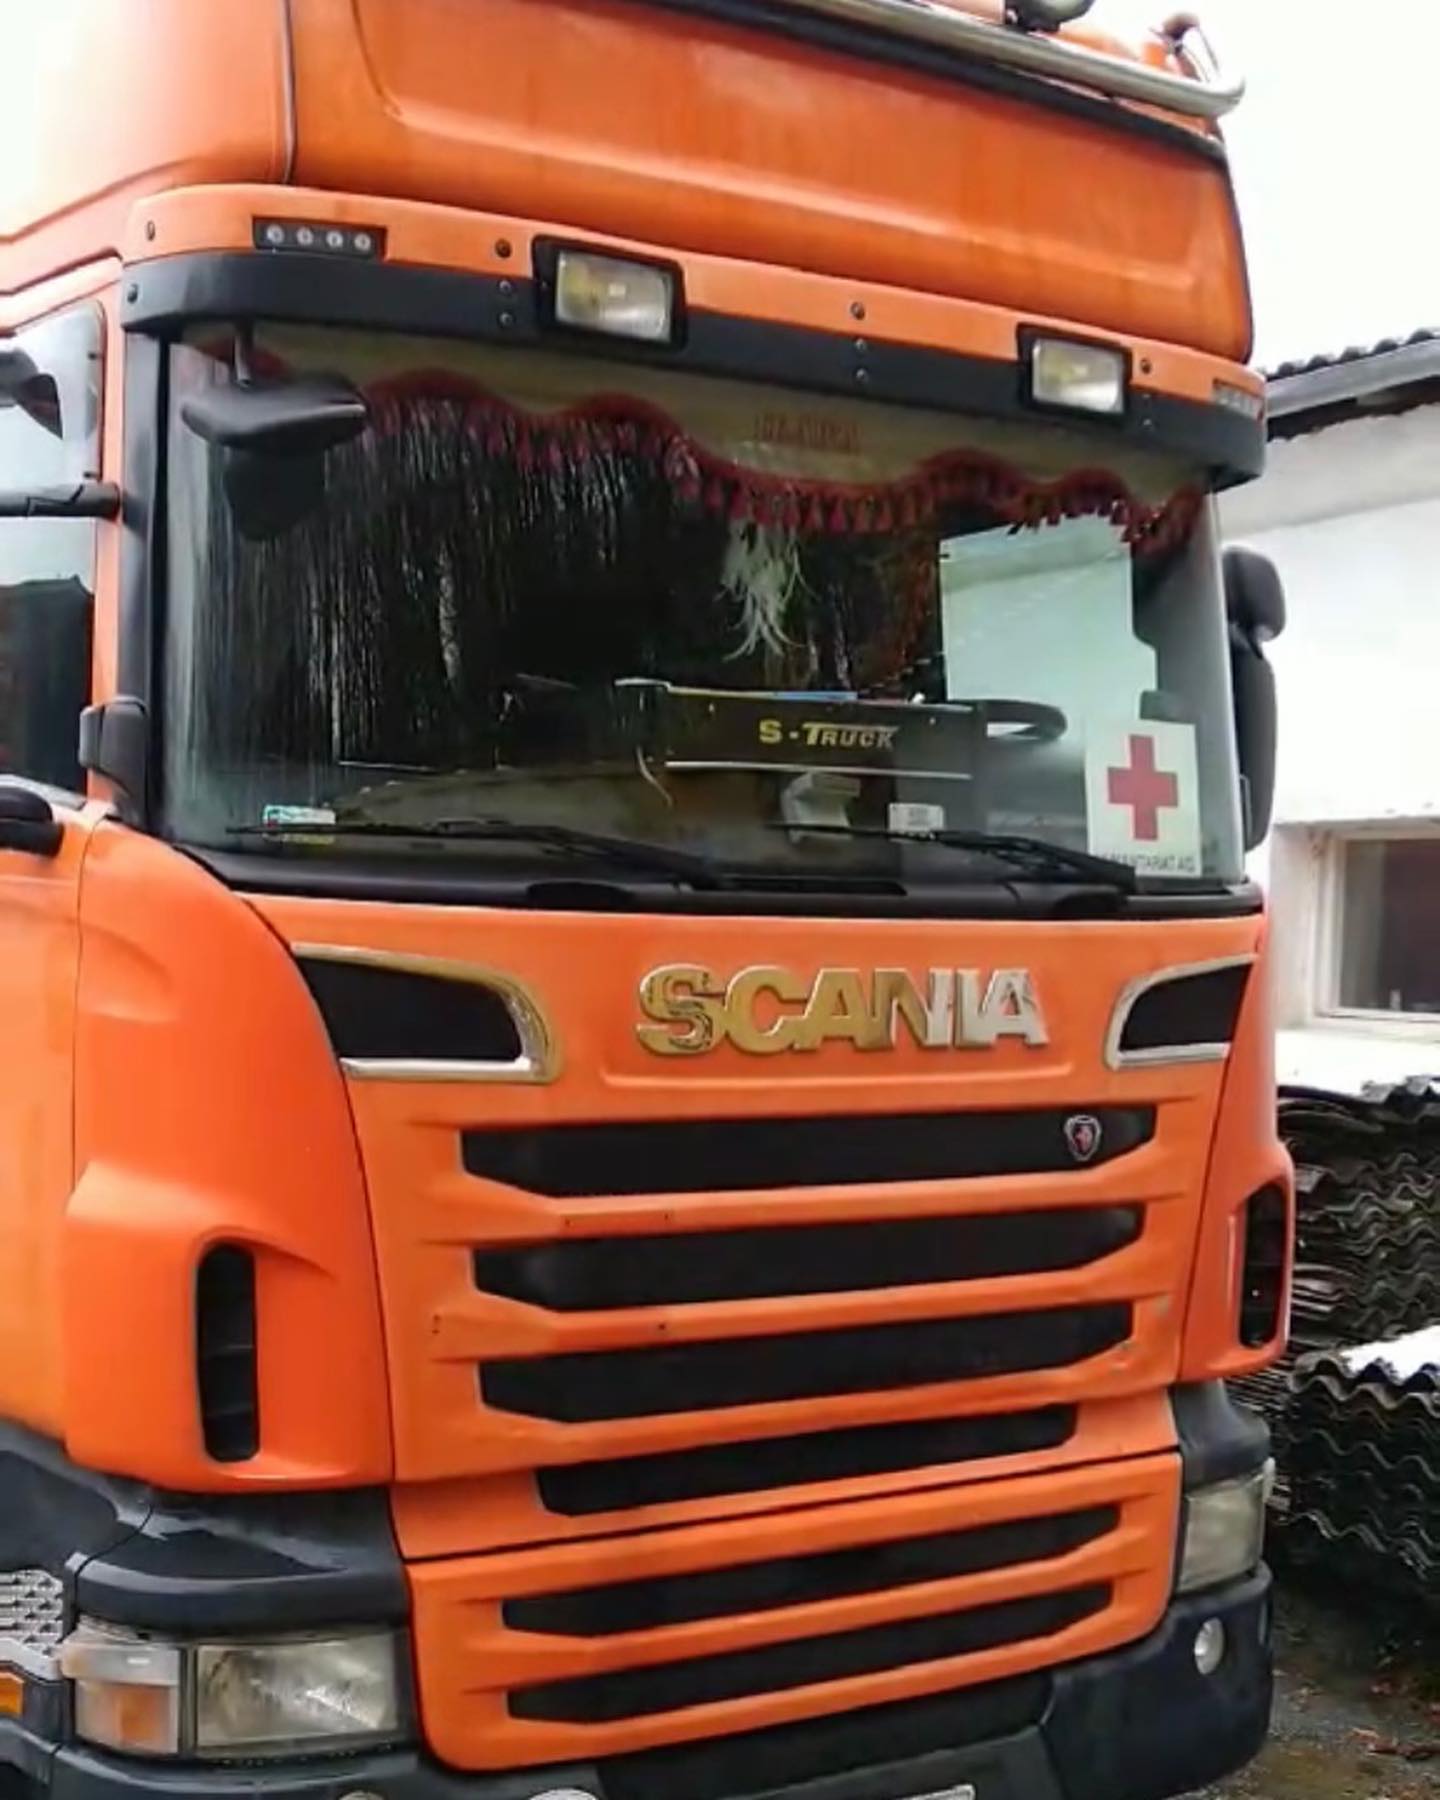 An orange truck is parked in front of a building.